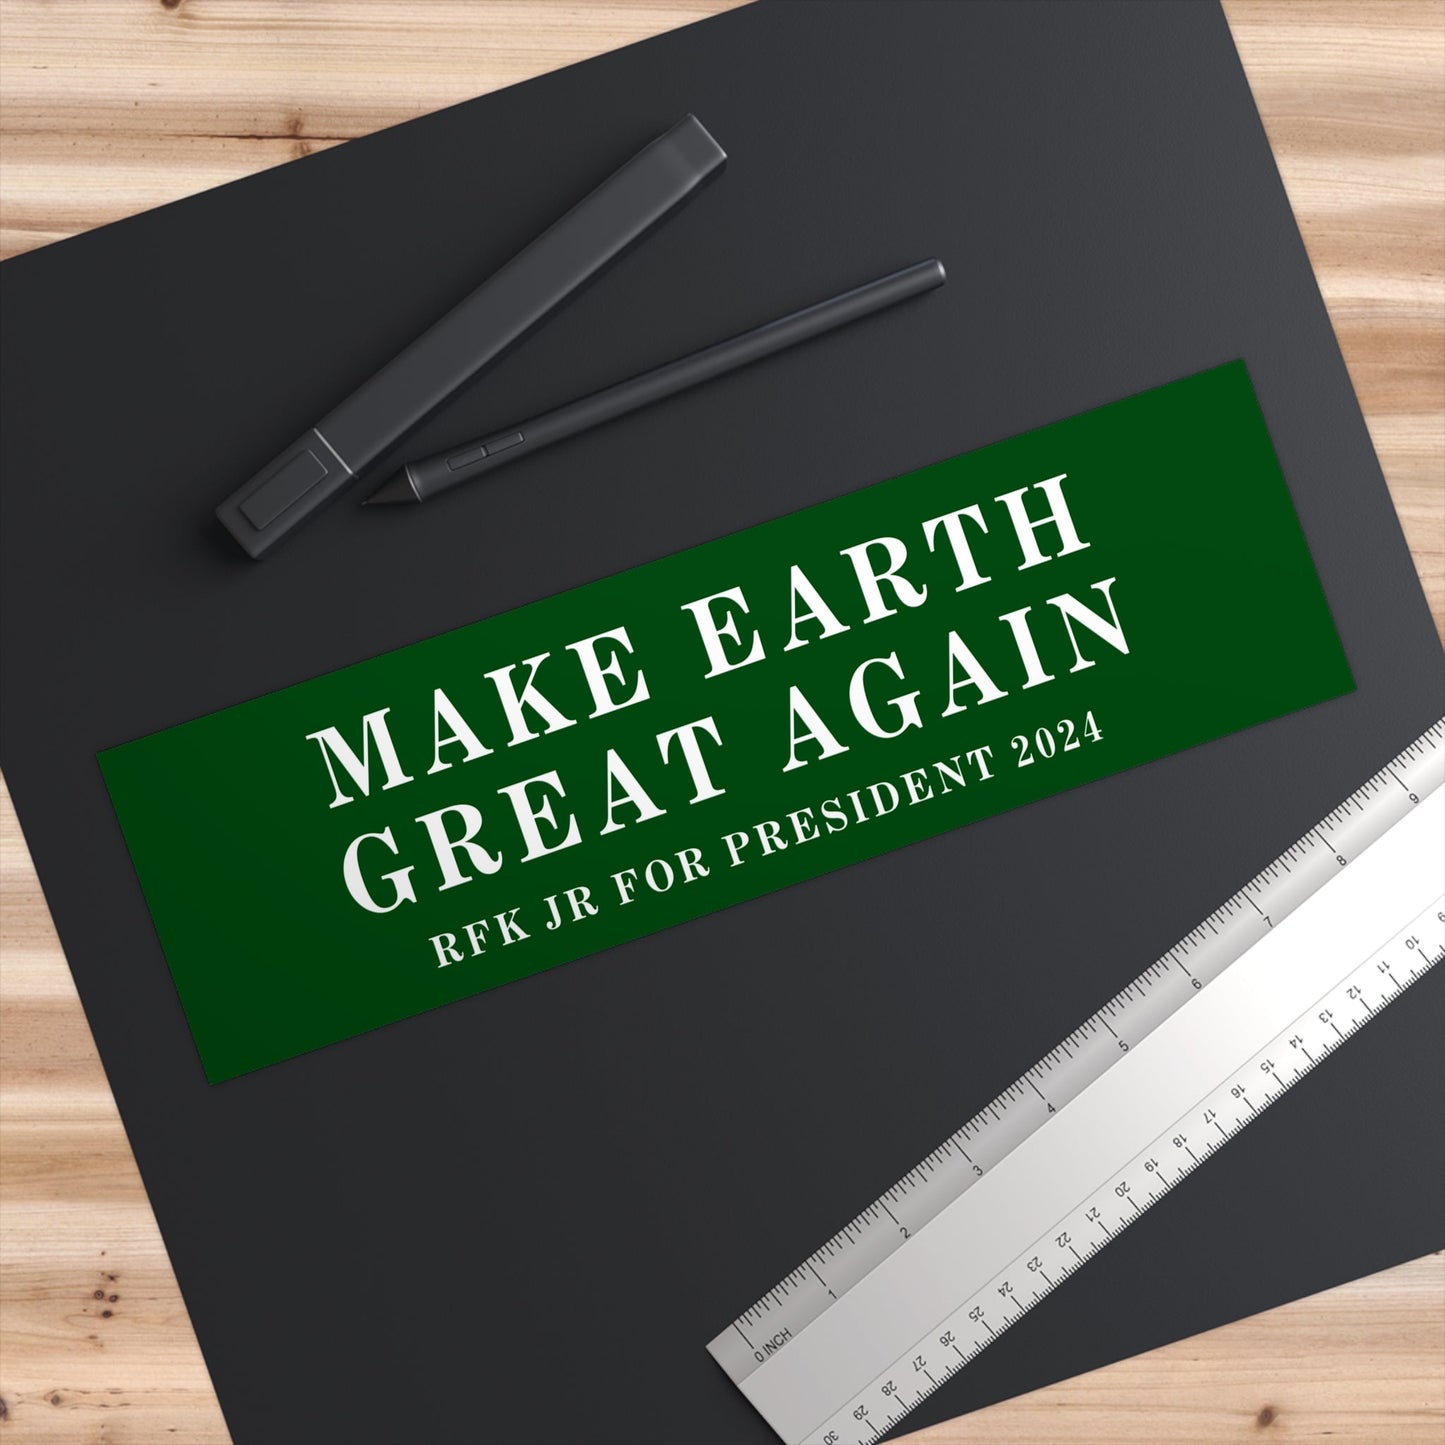 Make Earth Great Again Bumper Sticker - TEAM KENNEDY. All rights reserved